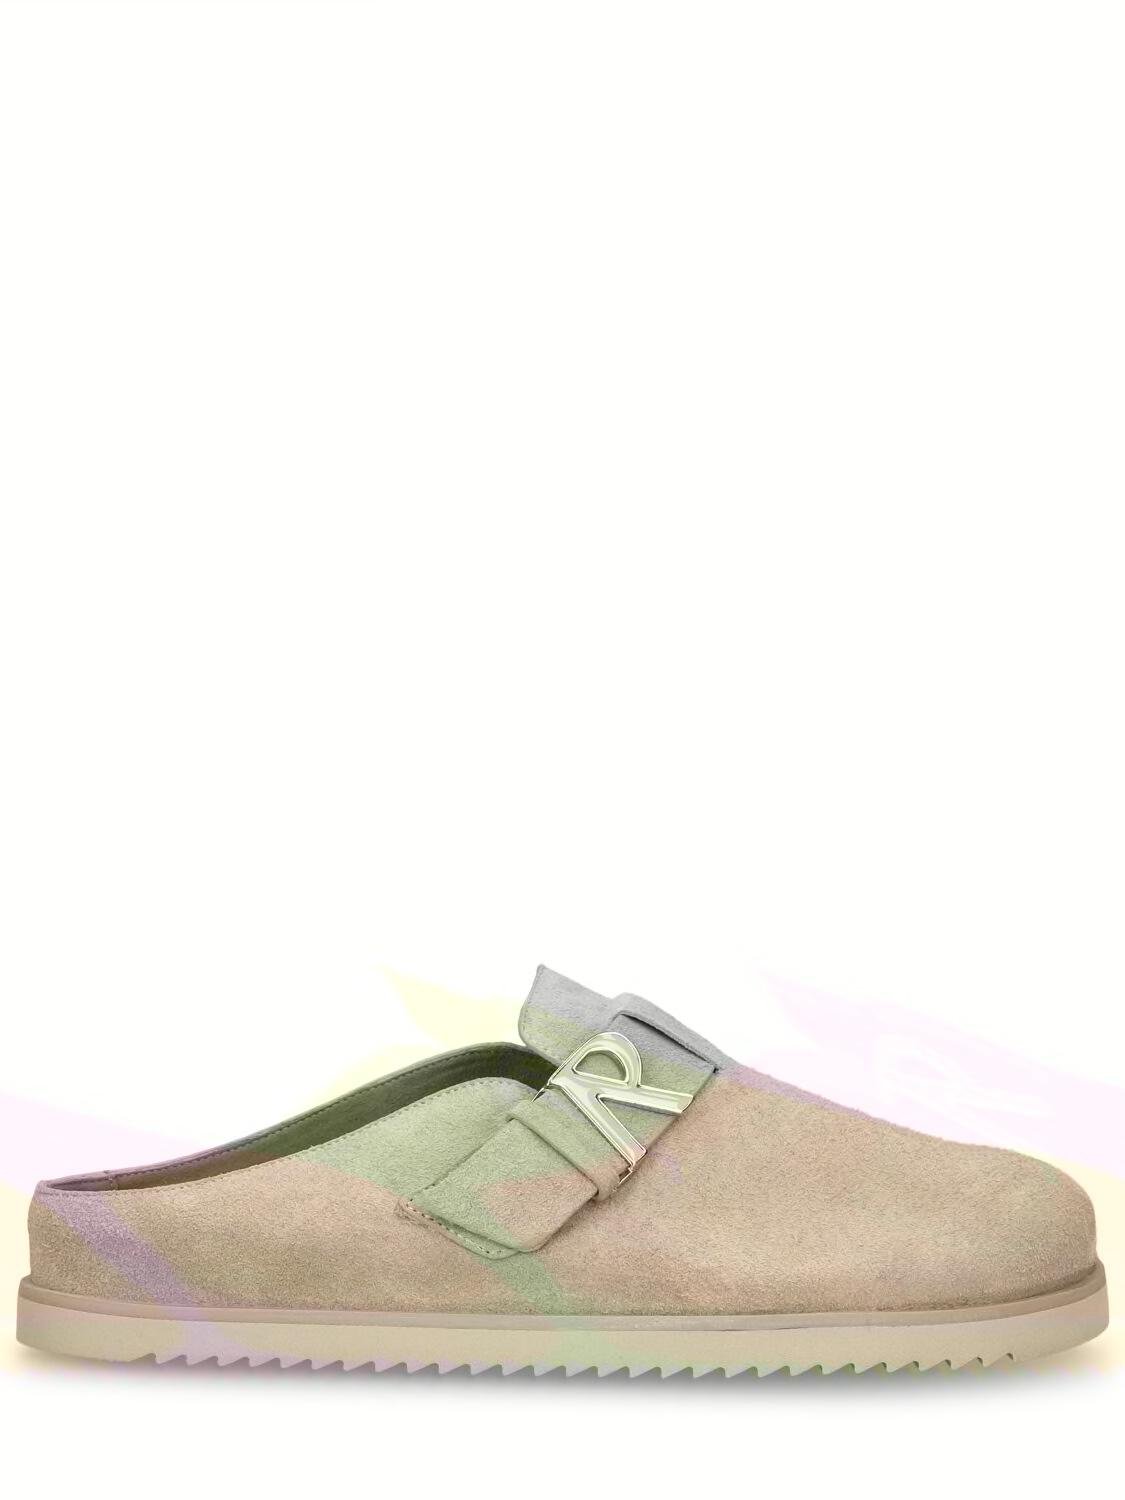 Initial Mules by REPRESENT